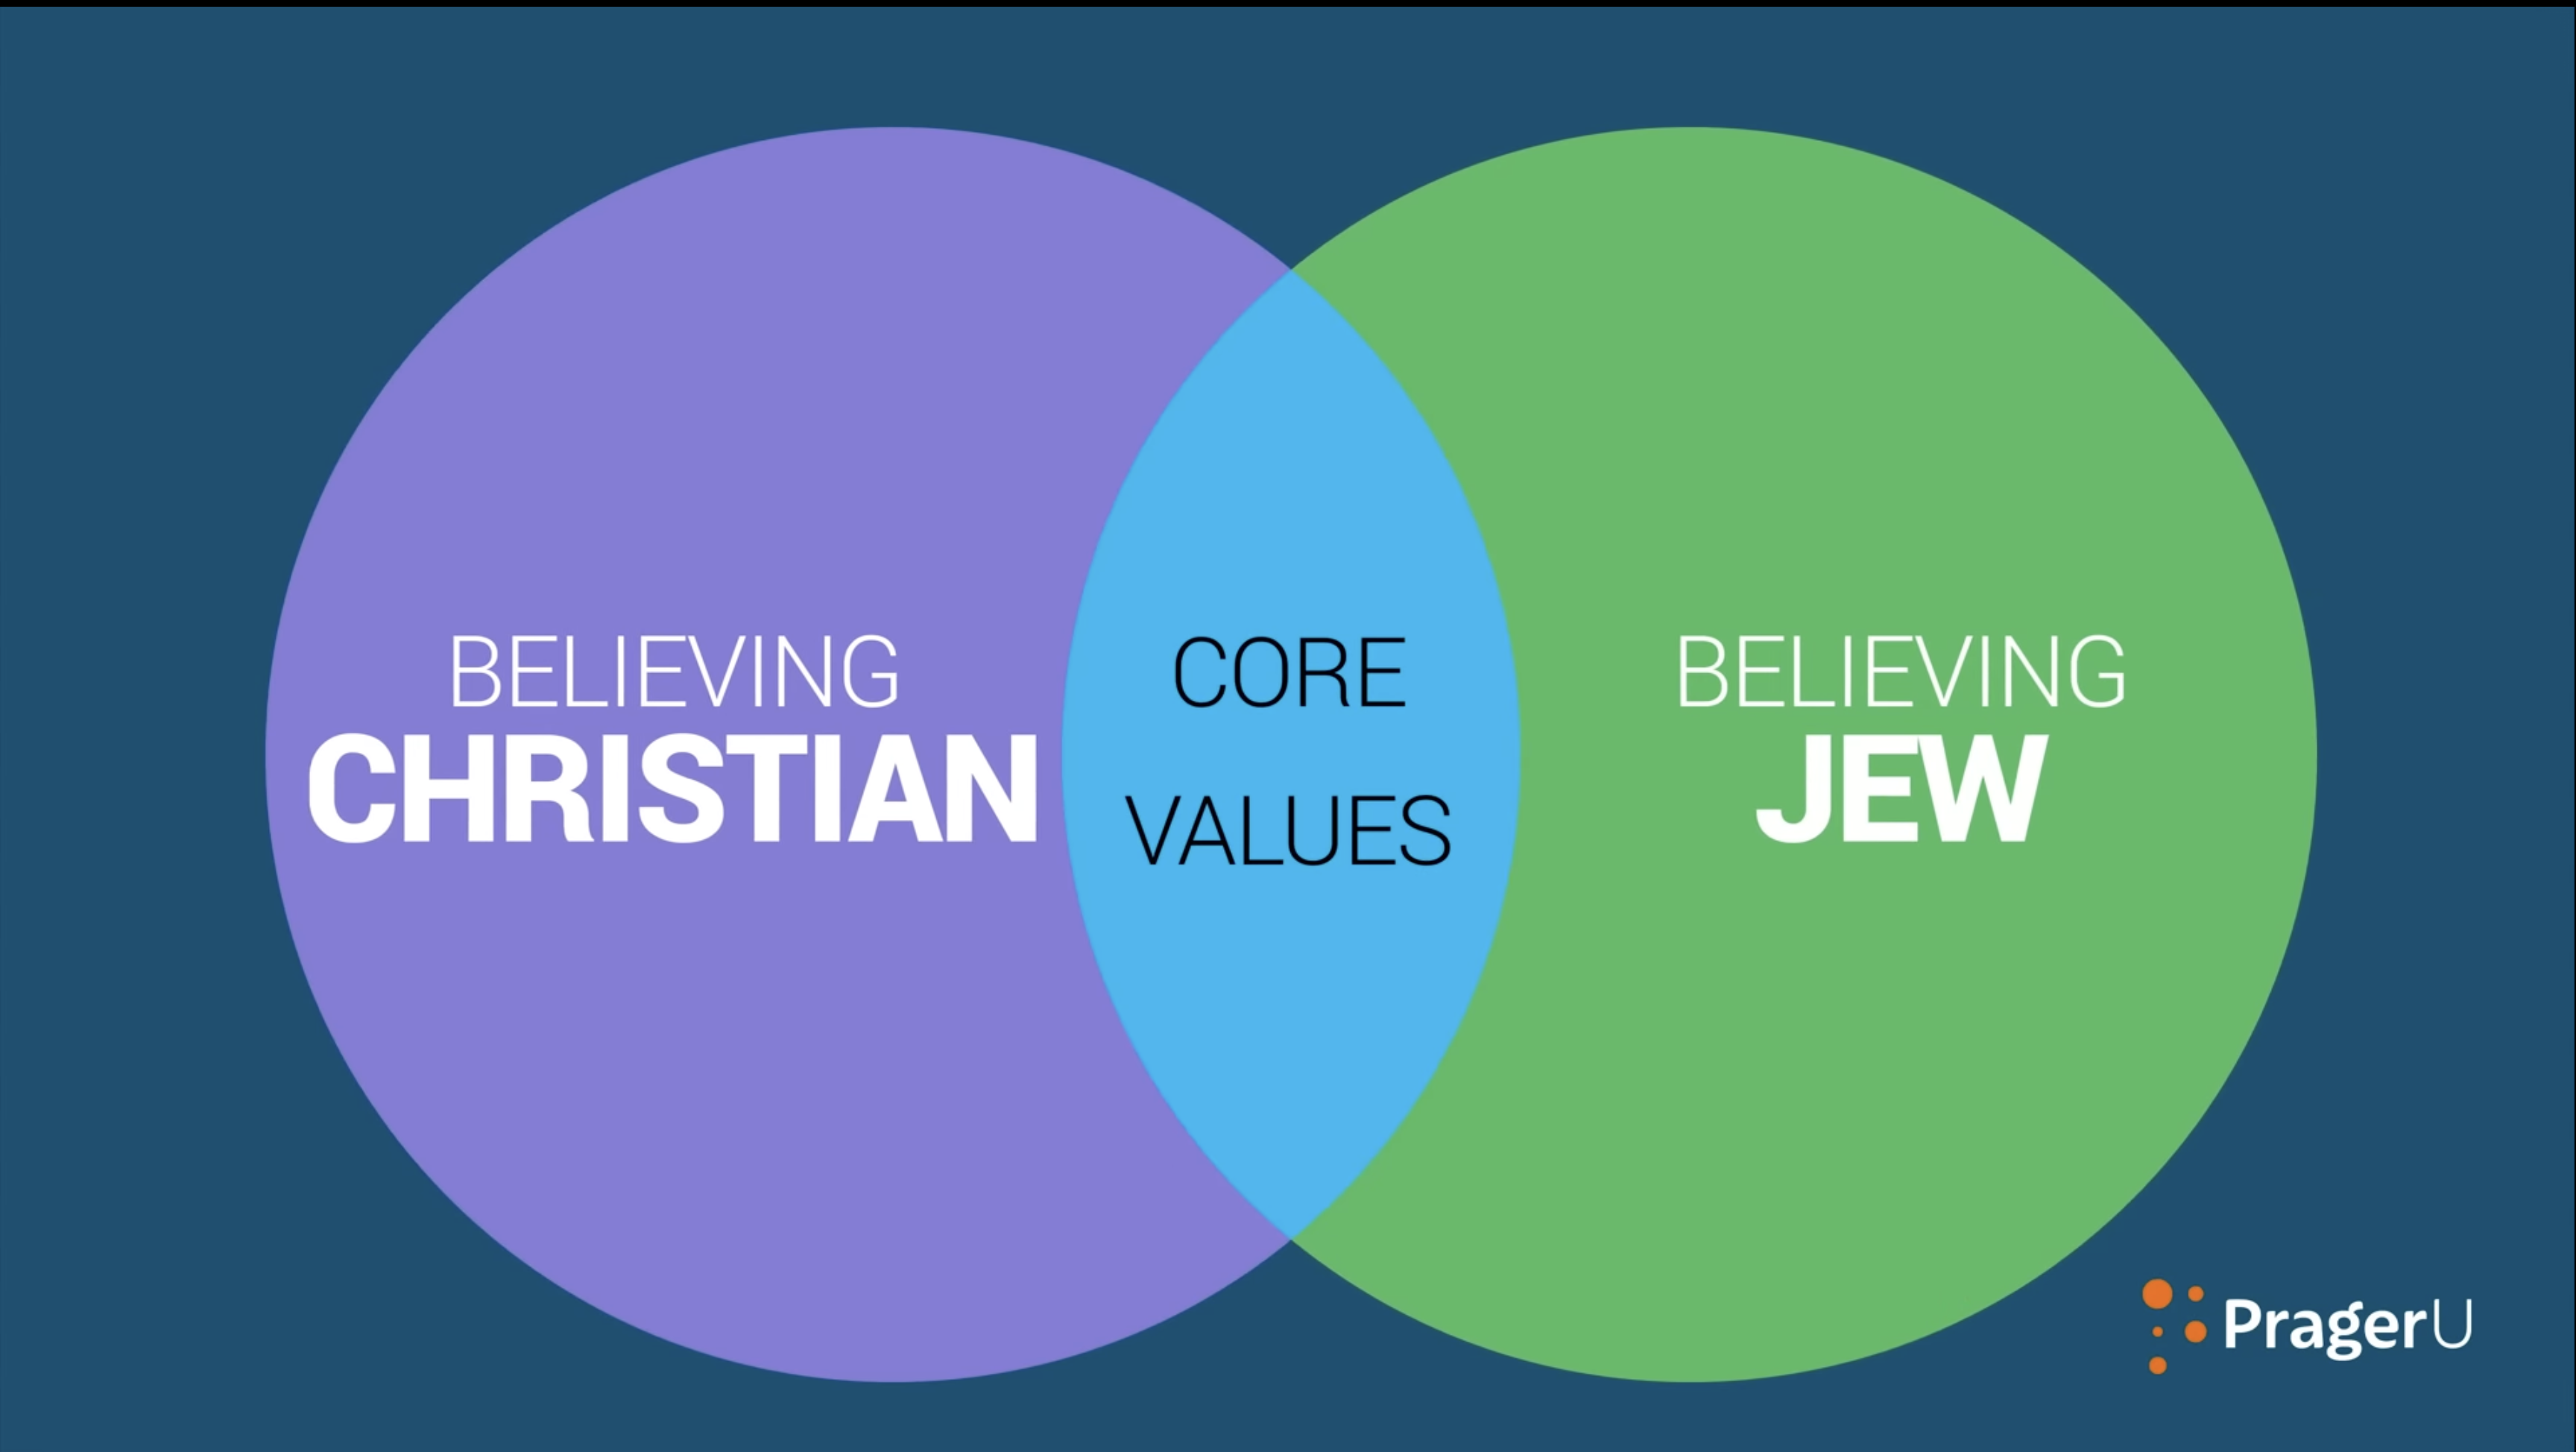 Judeo-Christian values: What are they?